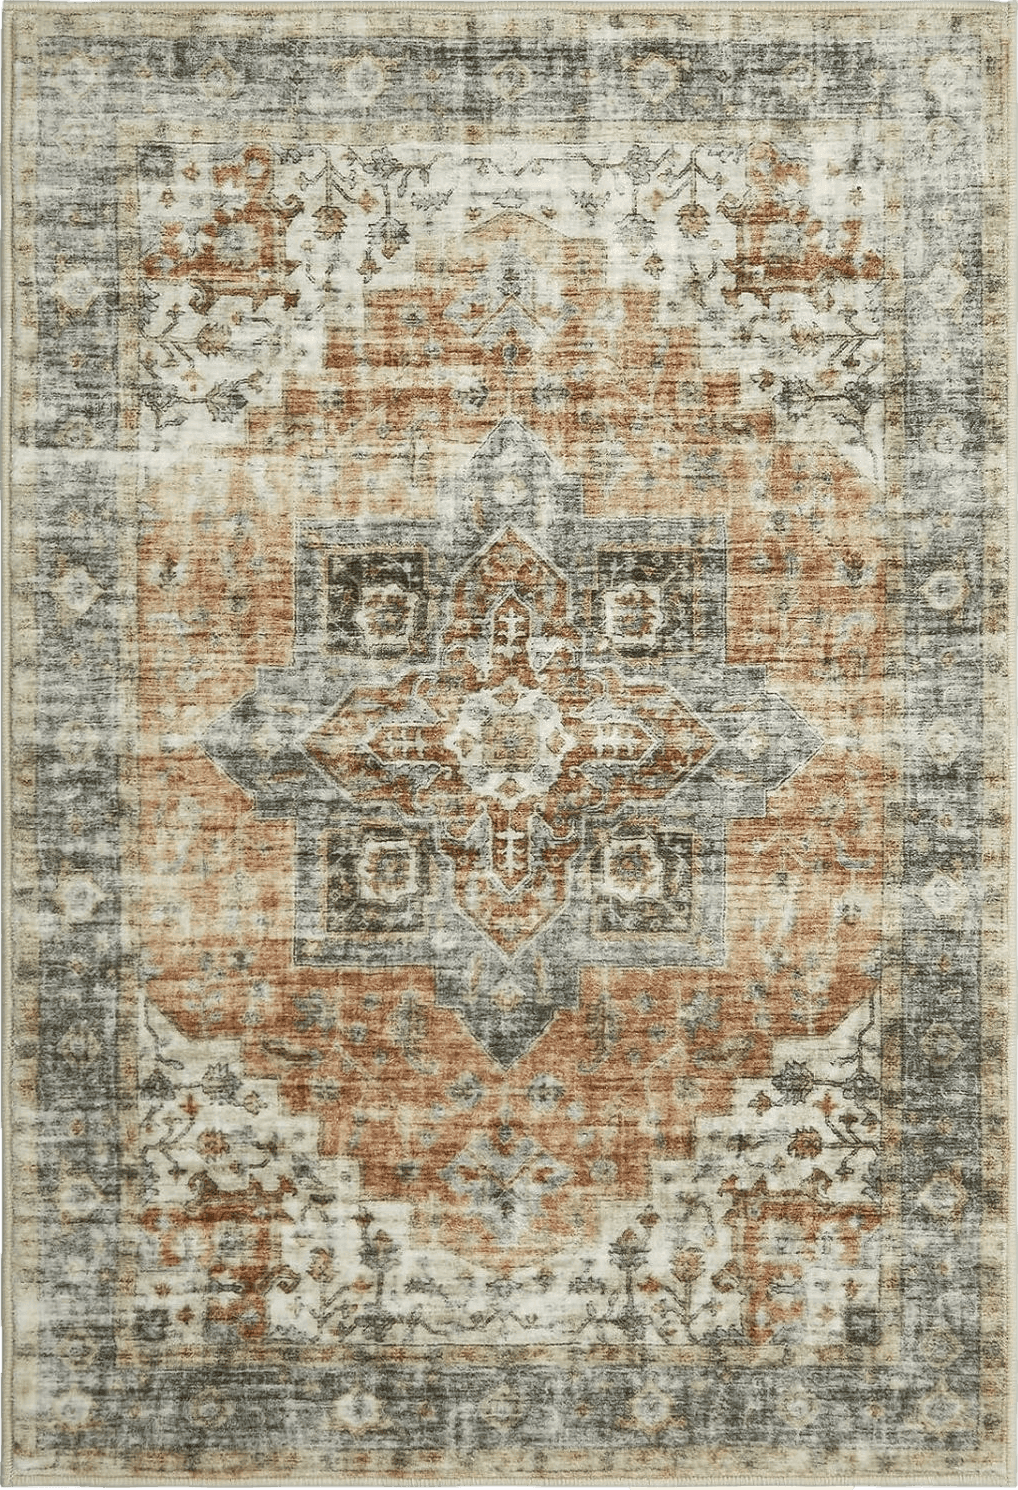 ROYHOME Area Rug 8x10 Non-Slip Vintage Low Pile Rugs Washable Rug Indoor Floor Cover Print Distressed Carpet Non-Shedding Oriental Area Rug for Living Room Bedroom, 8’x10’, Brown